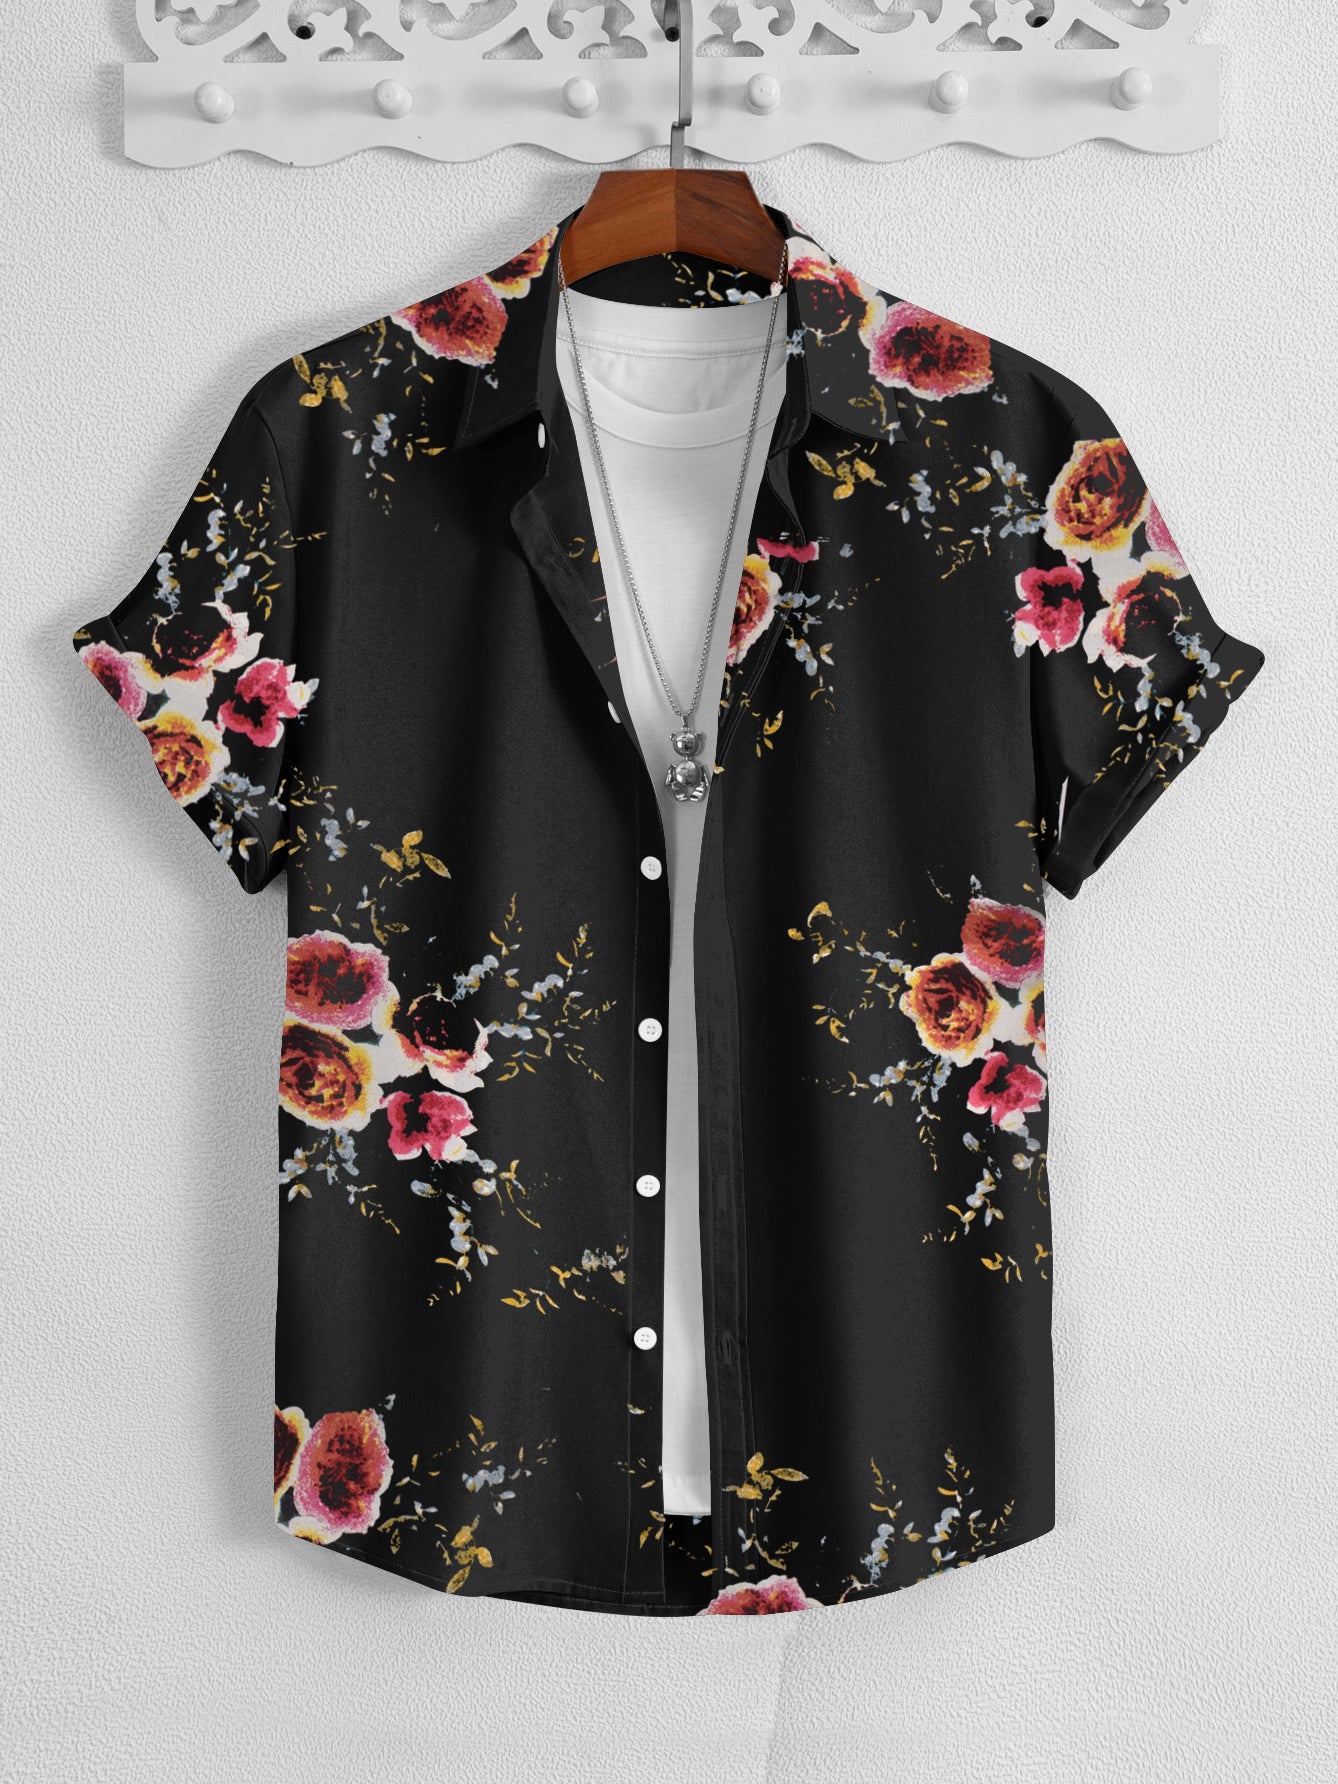 OXEN Premium Half Sleeve Slim Fit Casual Shirt For Men-Black with Allover Flower Print-SP2155